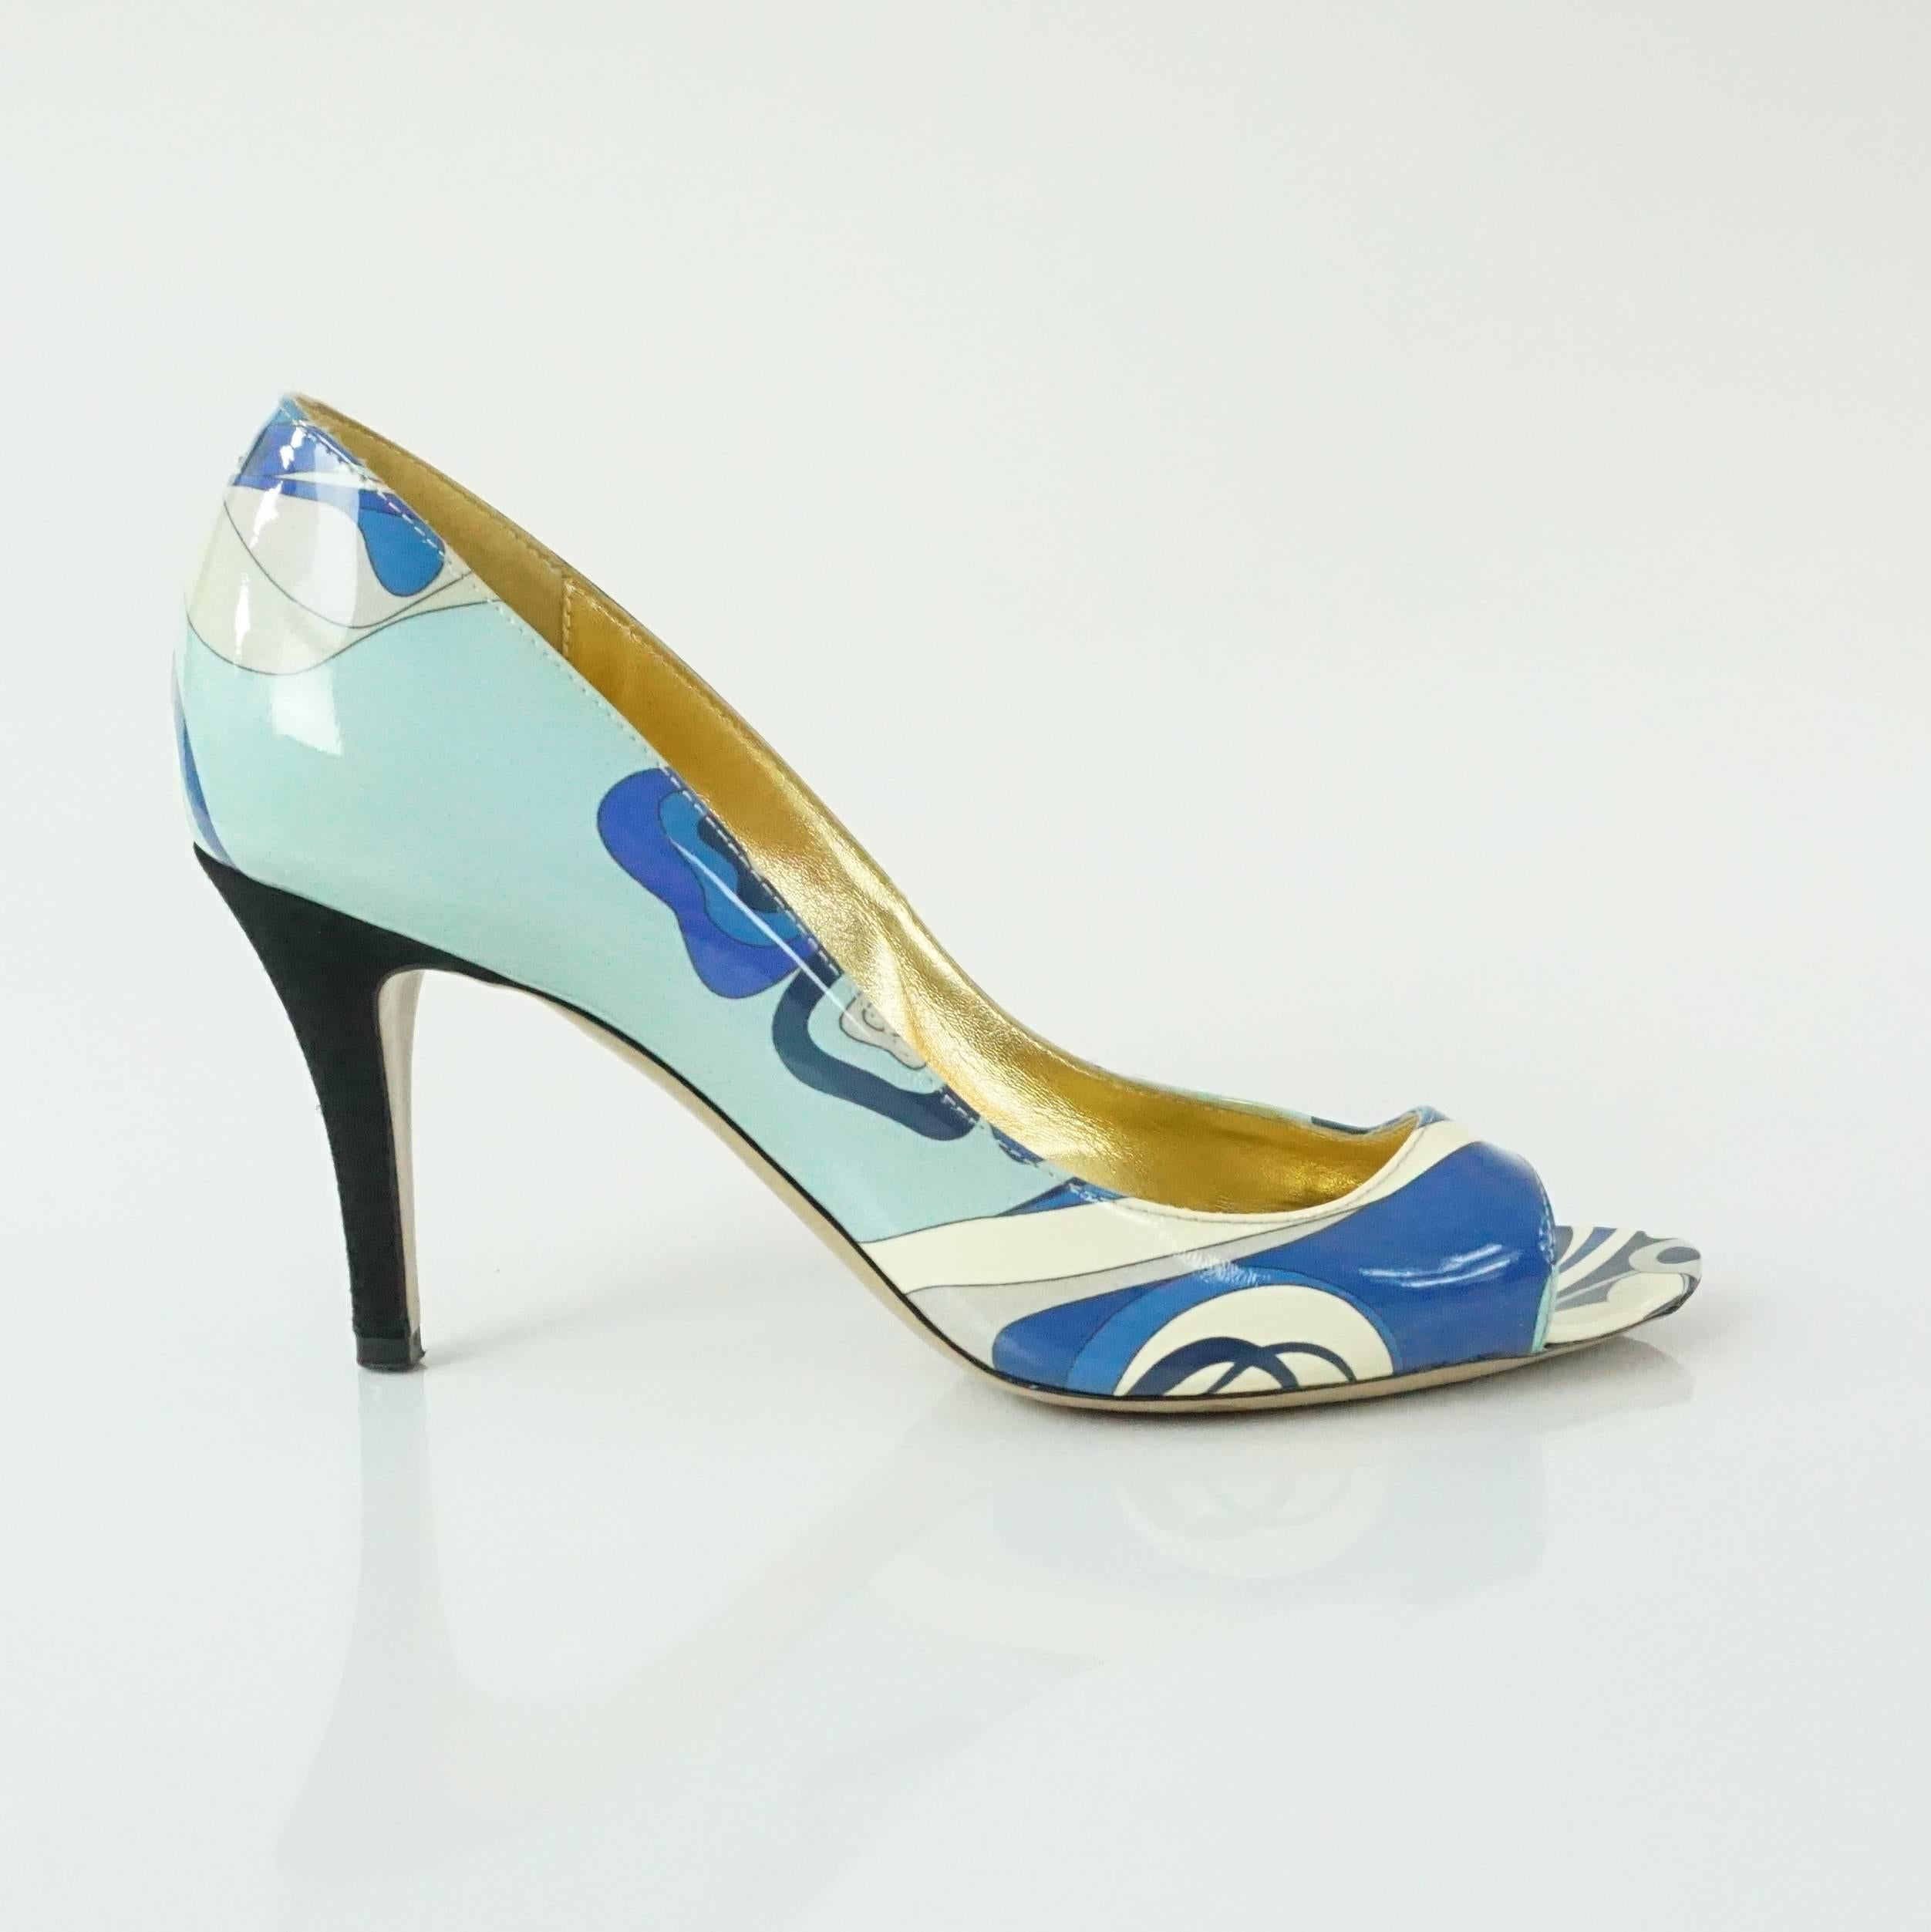 These Emilio Pucci heels are blue patterned patent leather. They have a peeptoe and a black heel. A duster is included. These shoes are in good condition with some markings and some raw strings.

Measurements
Heel: about 3.25